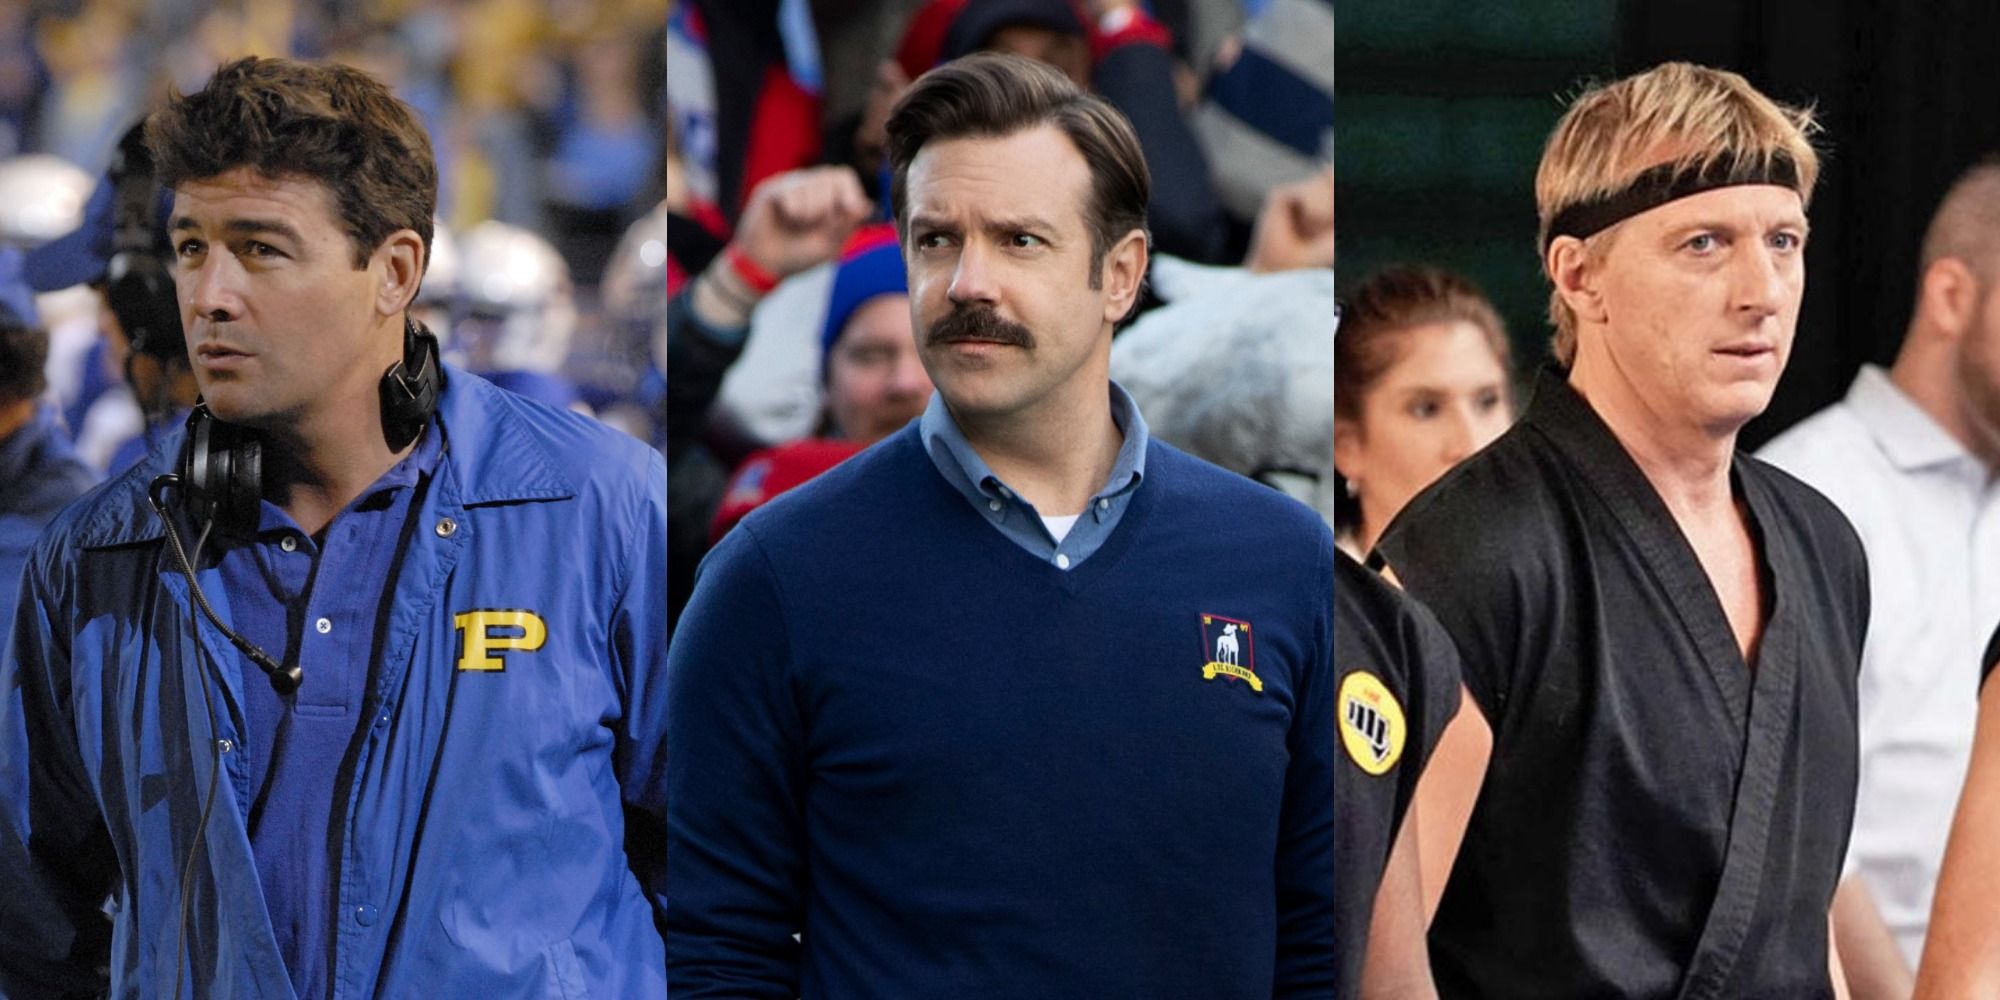 Split image of Coach Taylor from Friday Night Lights, Ted Lasso, and Johnny Lawrence from Cobra Kai